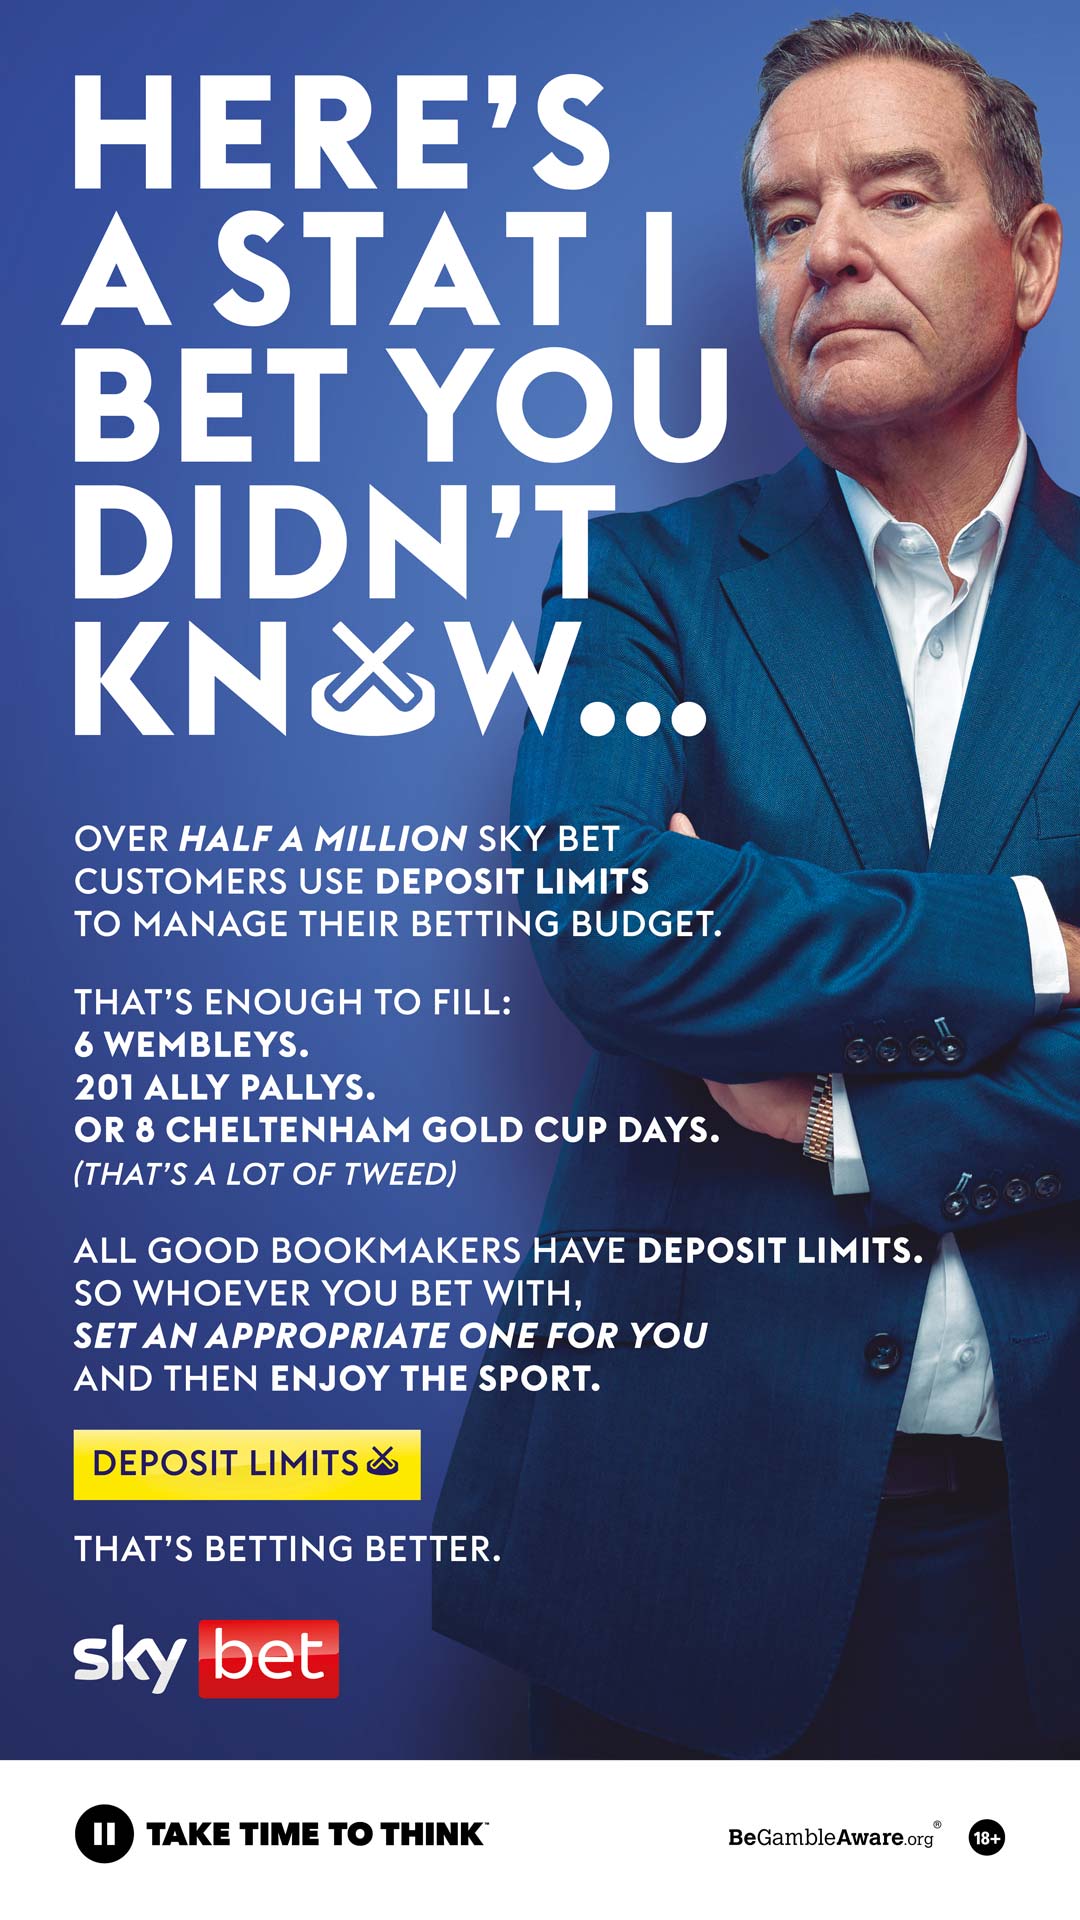 Sky Bet Responsible Gambling. Over half a million Sky Bet Customers use deposit limits to manage their betting budget.